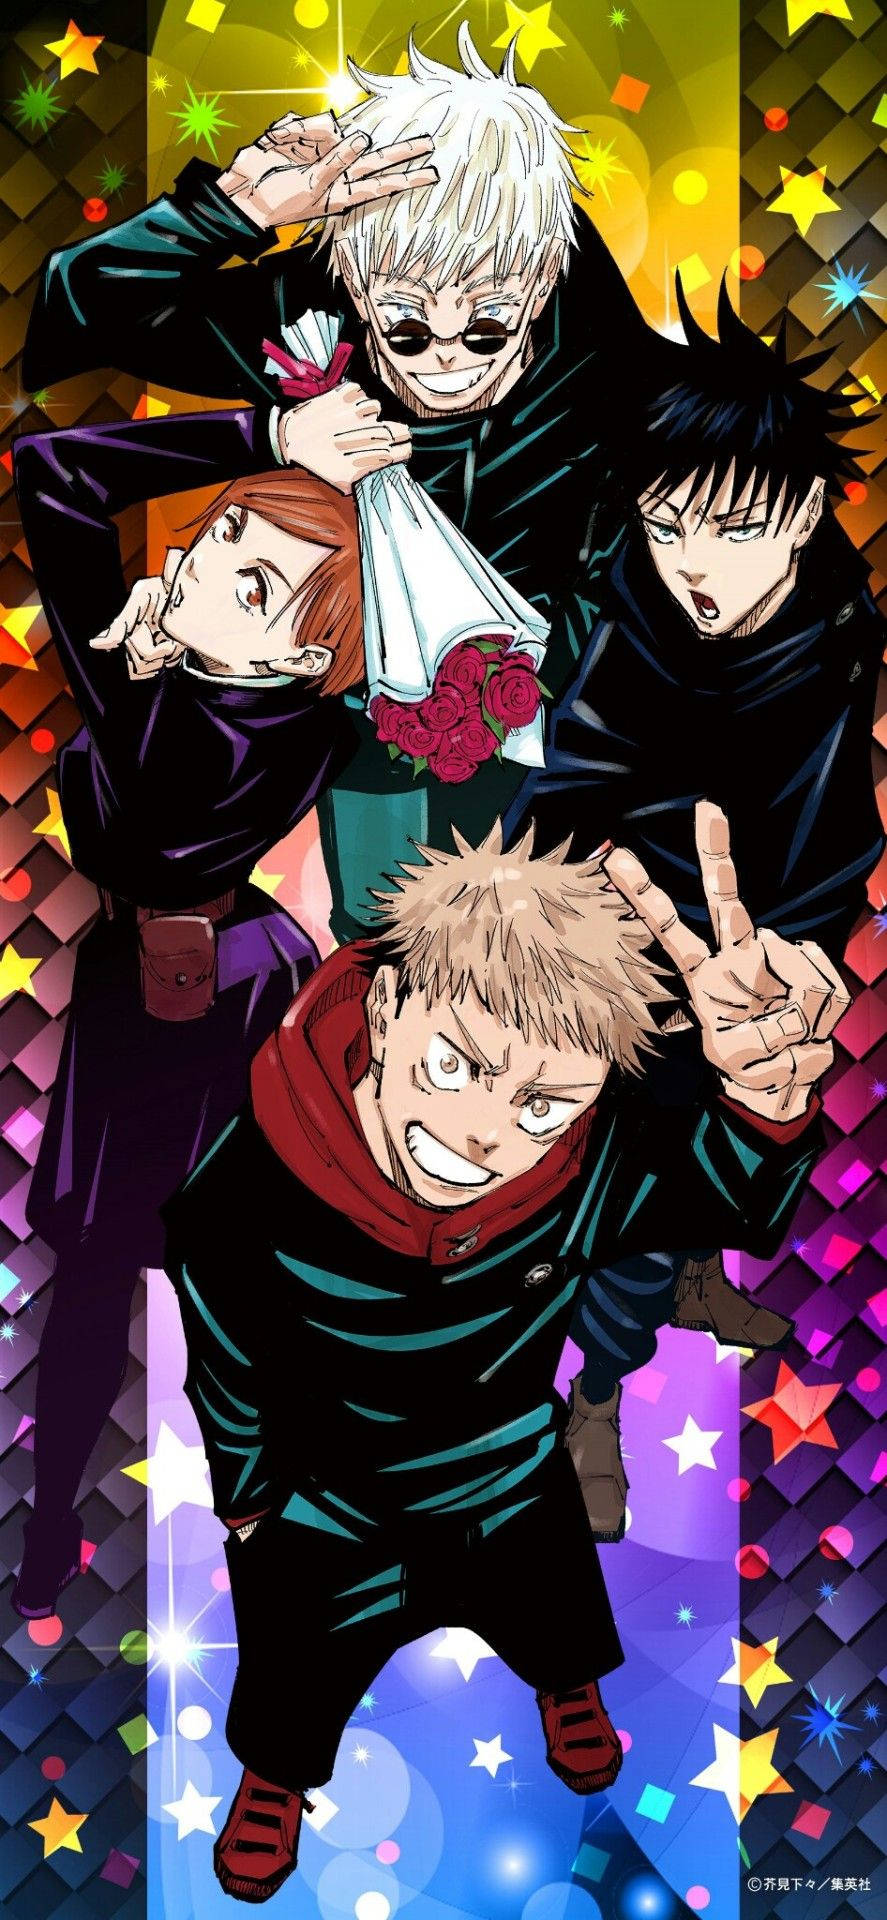 "The Jujutsu Kaisen crew is ready to tackle any challenge!" Wallpaper